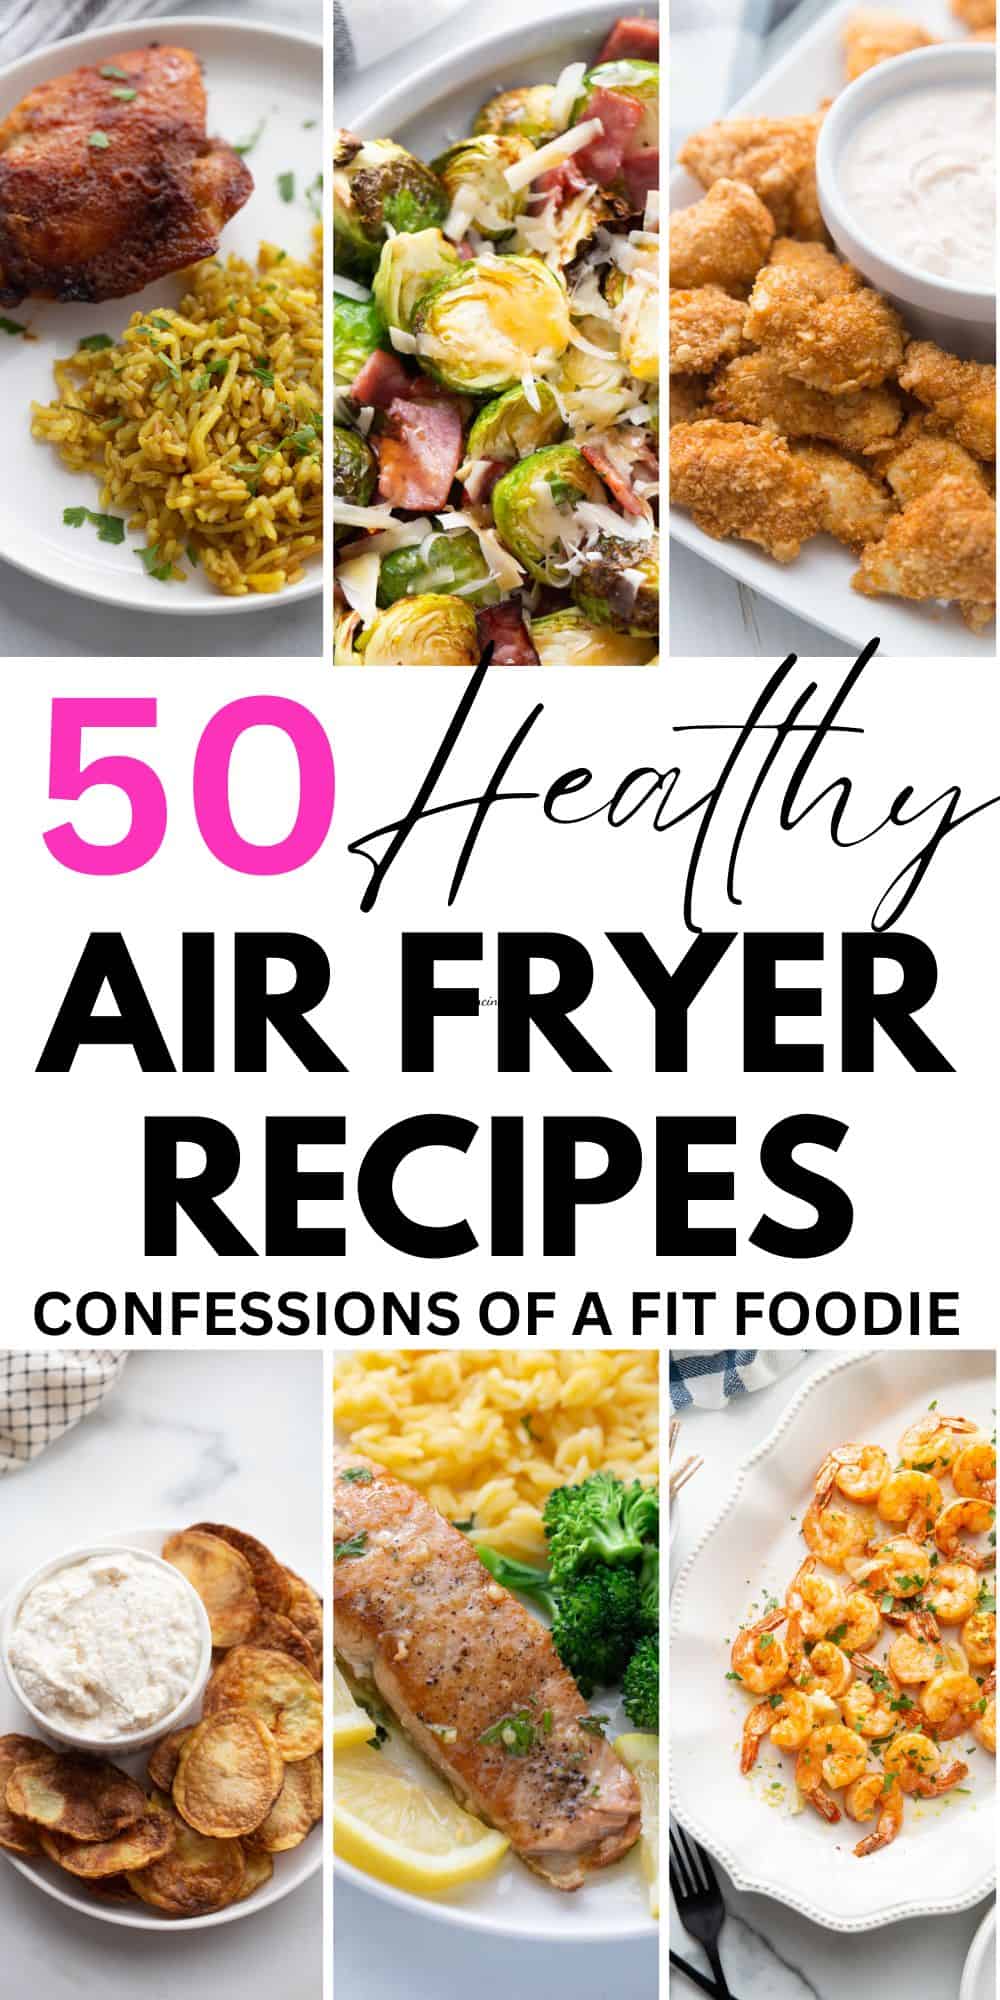 Pinterest image with text overlay 50 Healthy Air Fryer Recipes